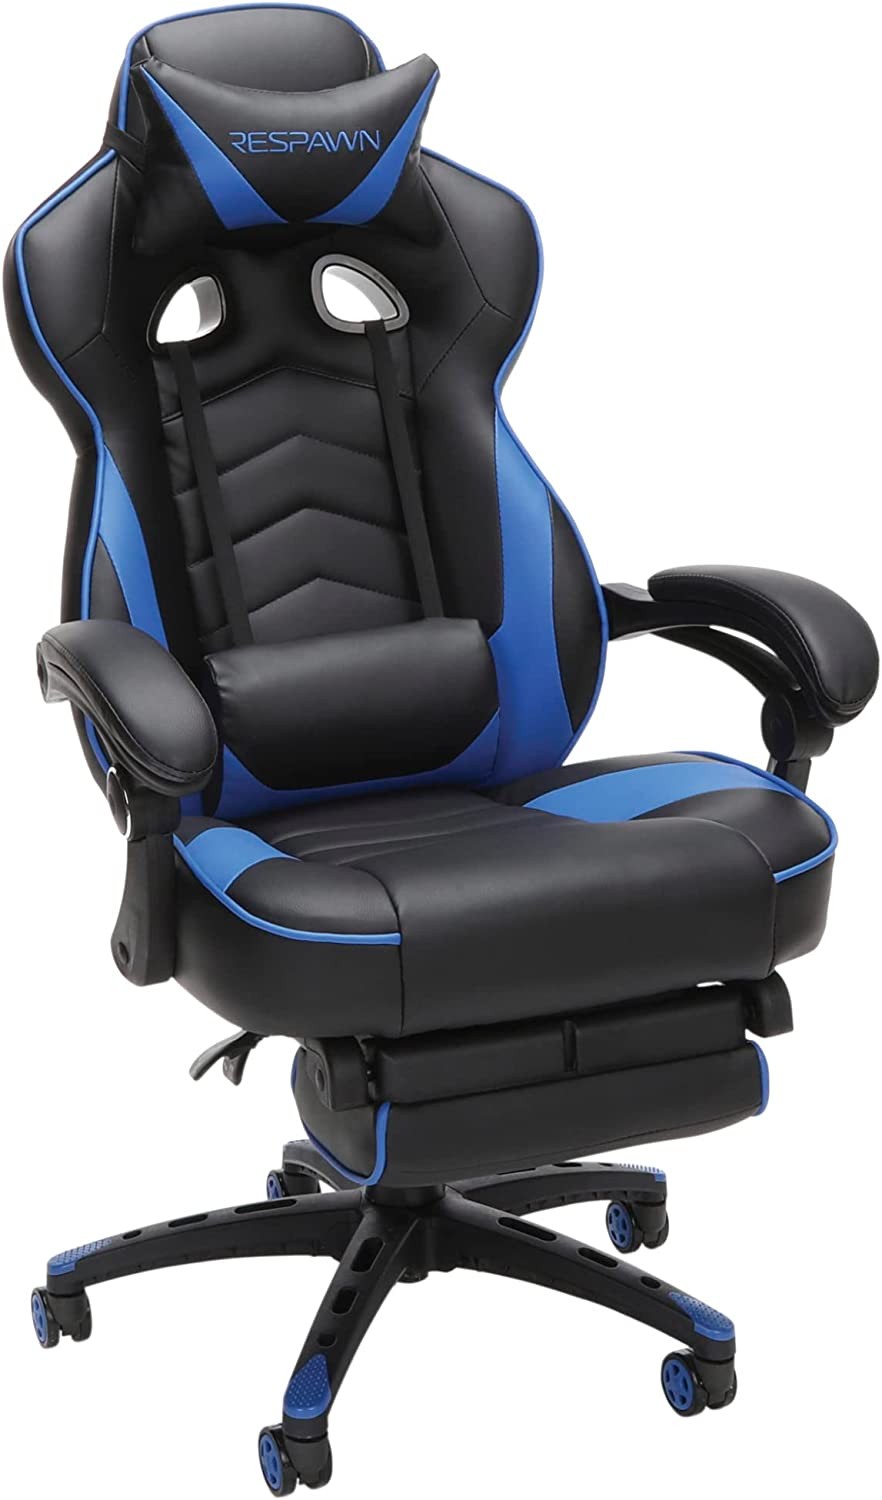 RESPAWN 110 Racing Style Leather Gaming Chair